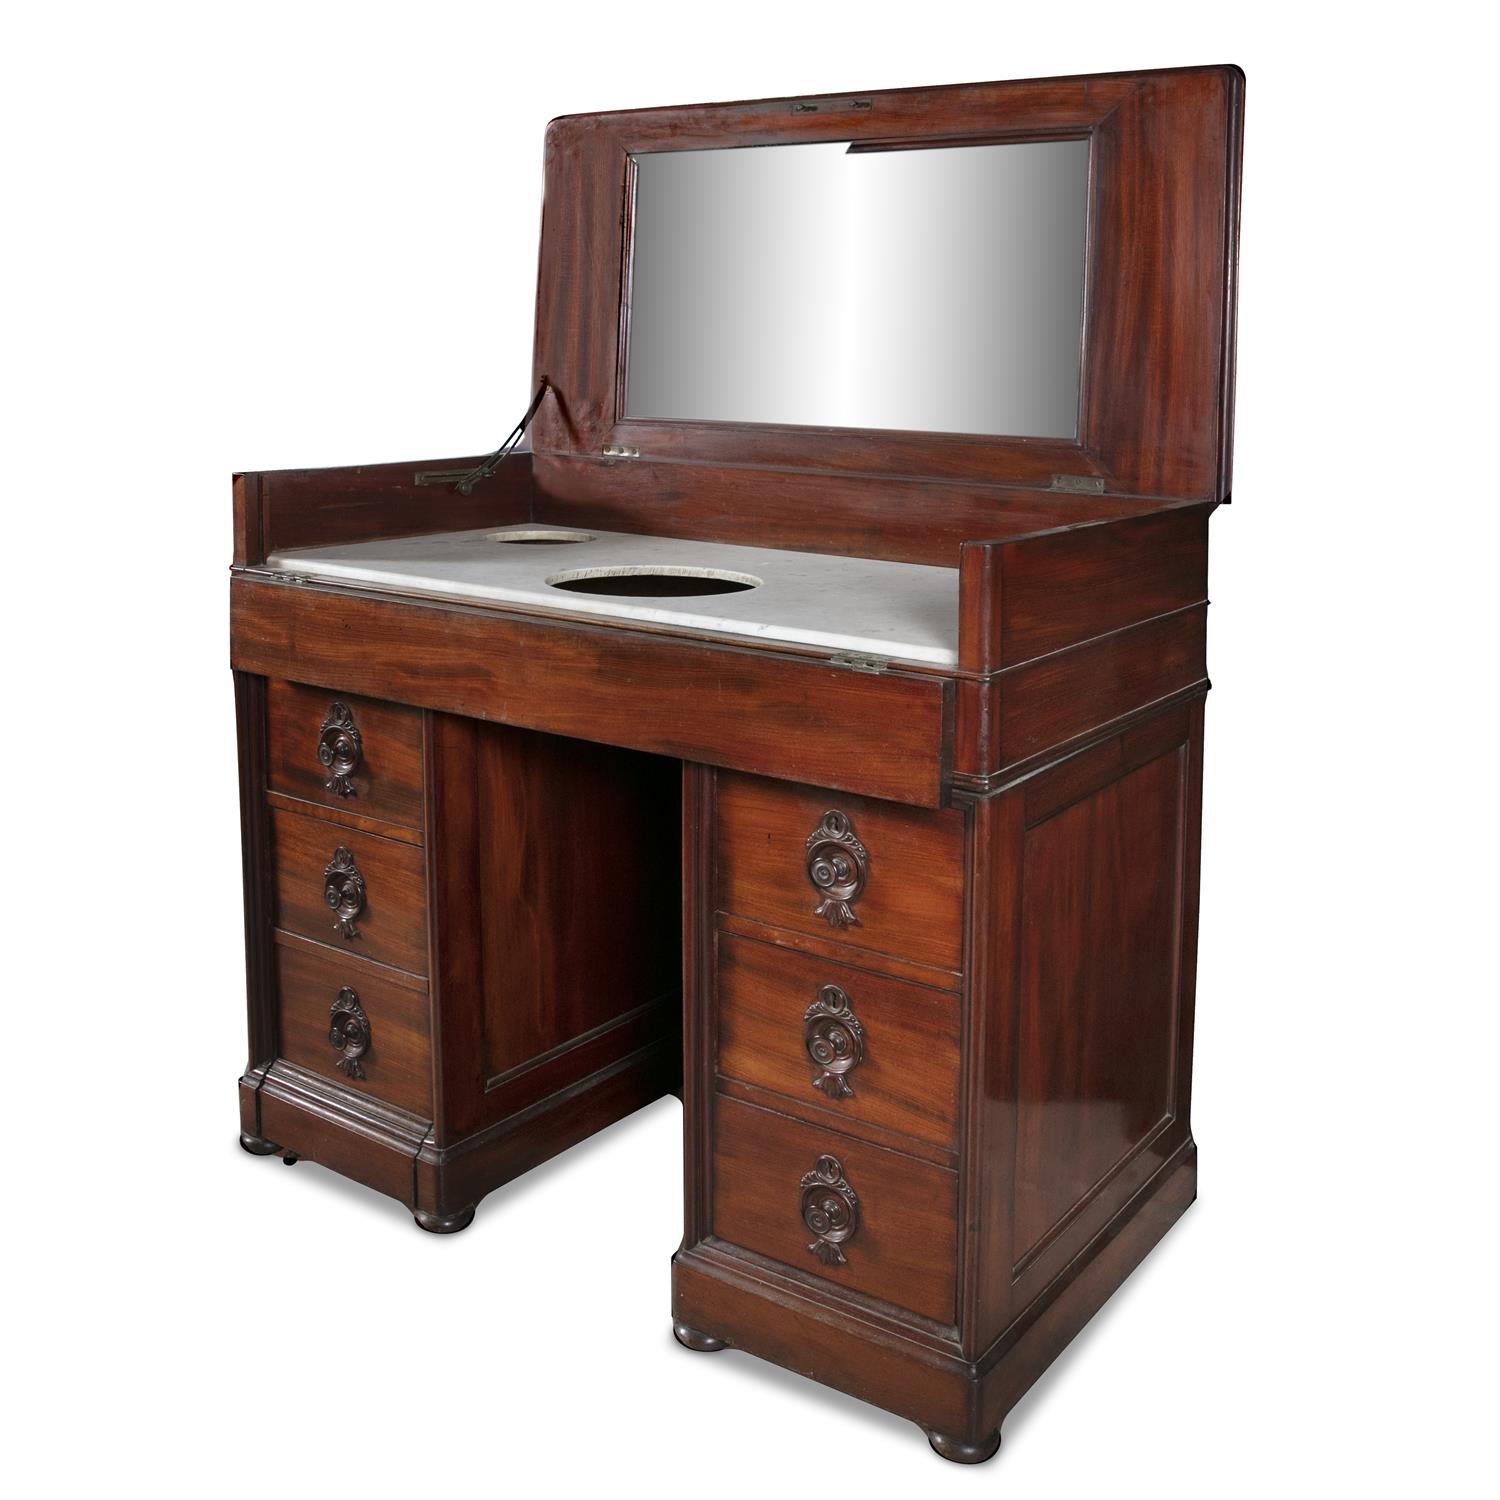 AN UNUSUAL WILLIAM IV MAHOGANY WASH STAND, of rectangular form, with hinged lift top, - Image 4 of 4